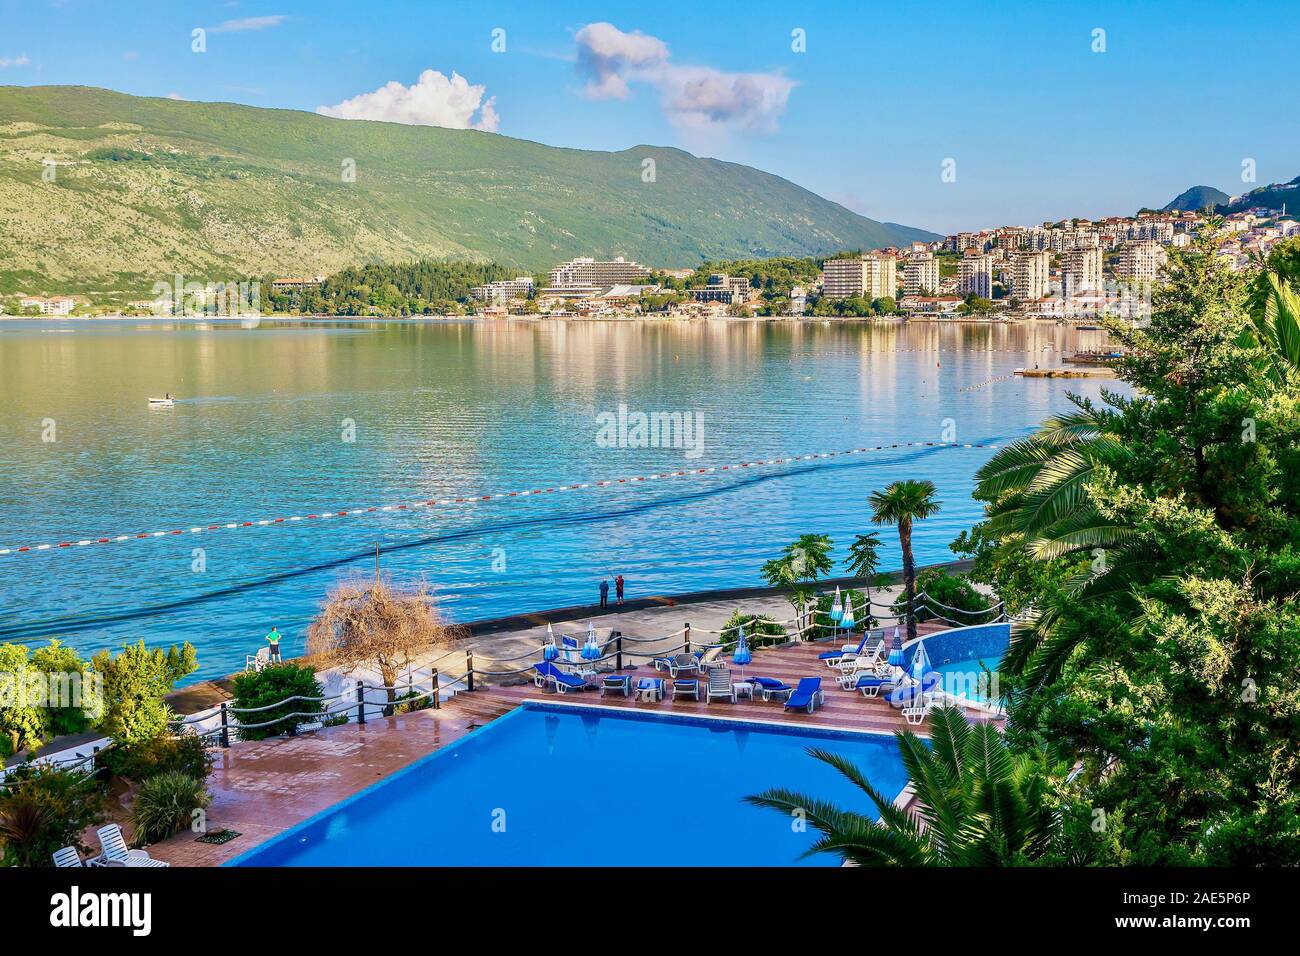 Showing the waterfront area of the popular tourist town located on the Bay of Kotor. Stock Photo